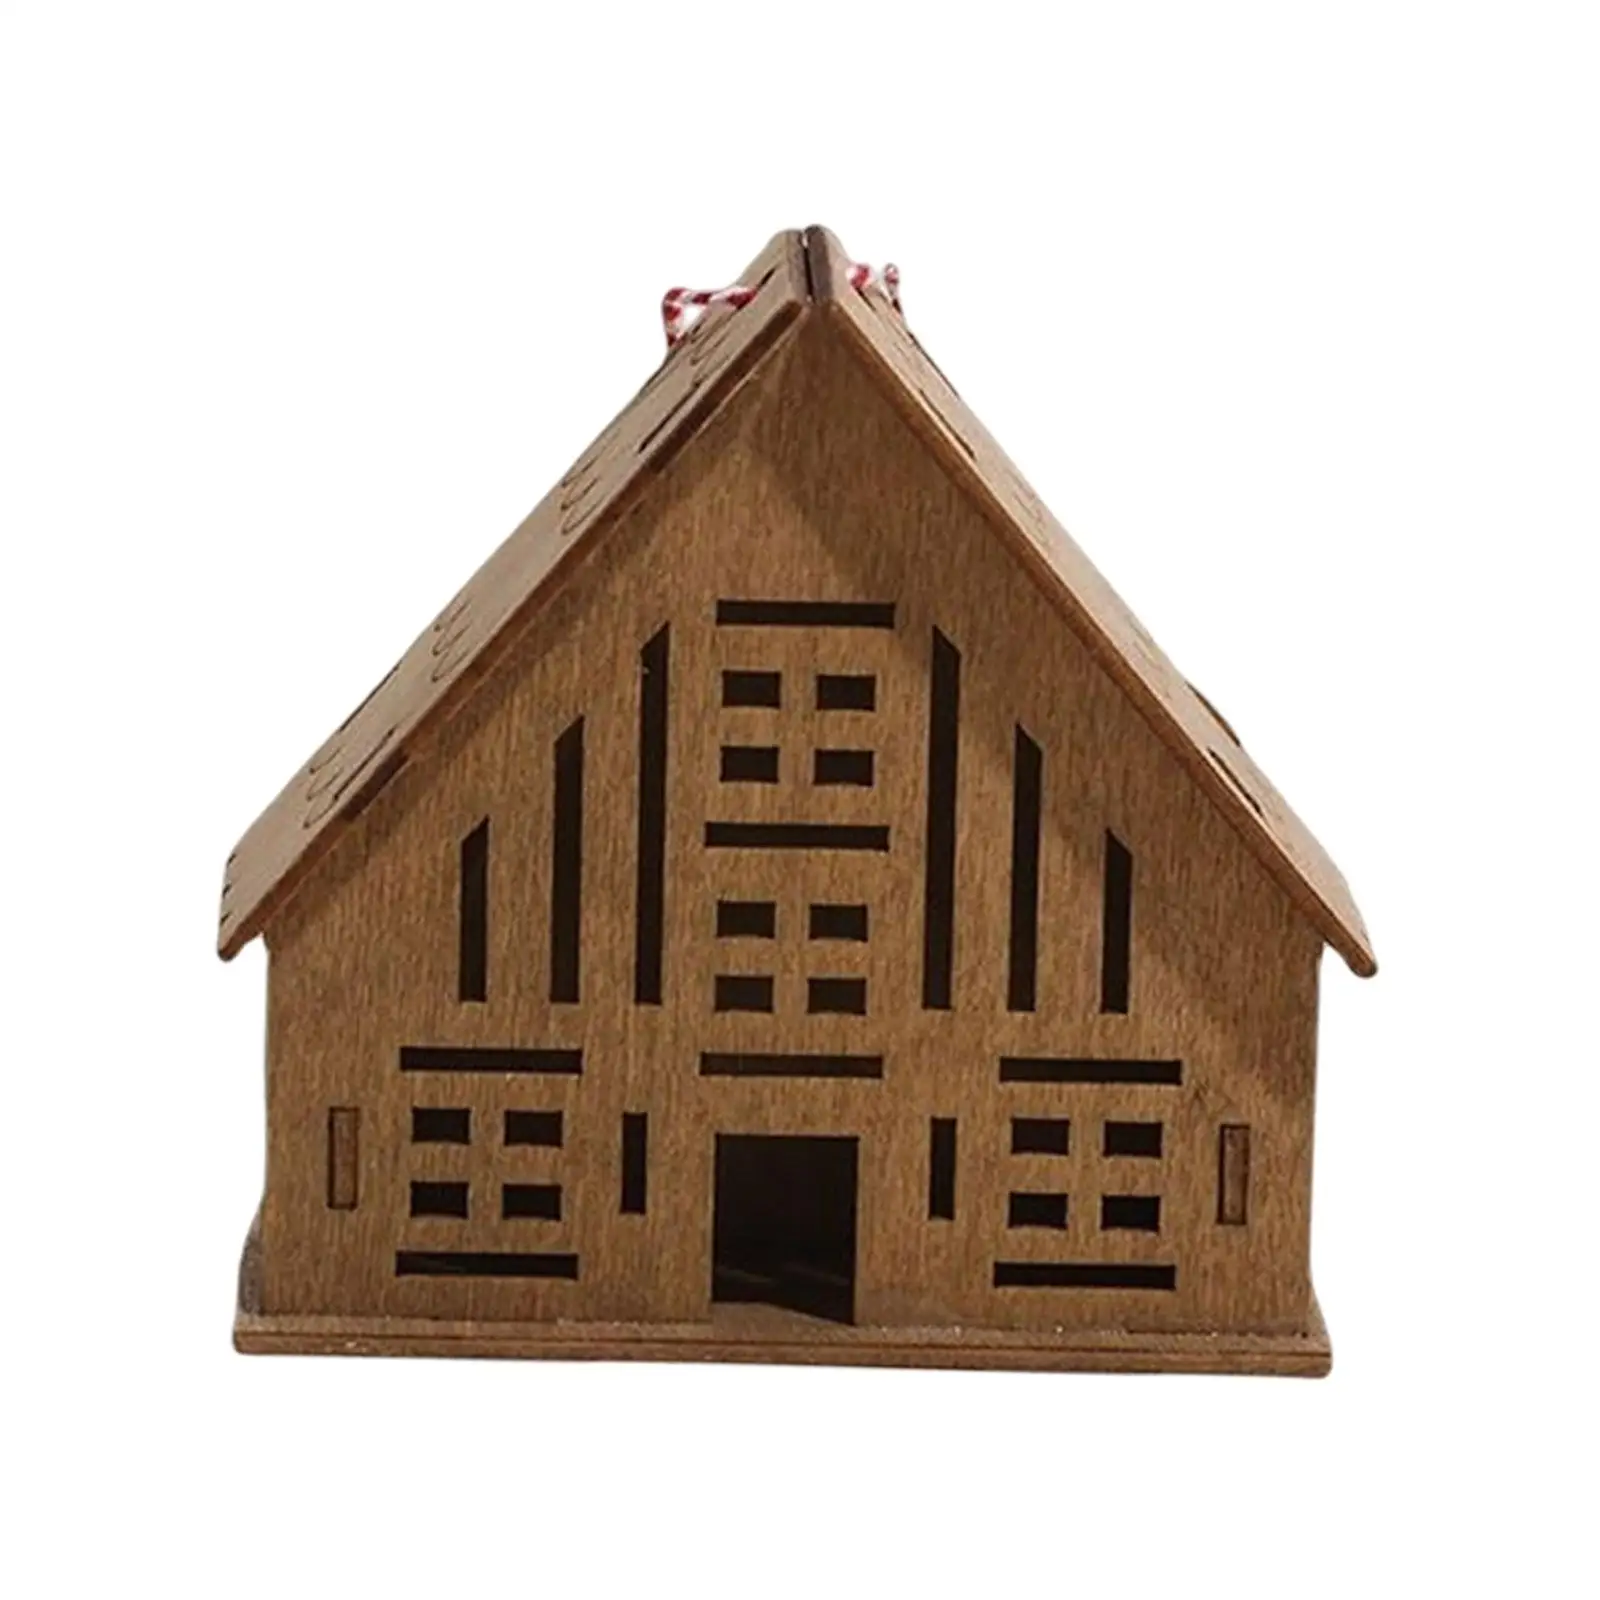 Christmas Wooden House Cabin Ornaments Handicrafts Pendant for Home Window DIY Crafts Decor